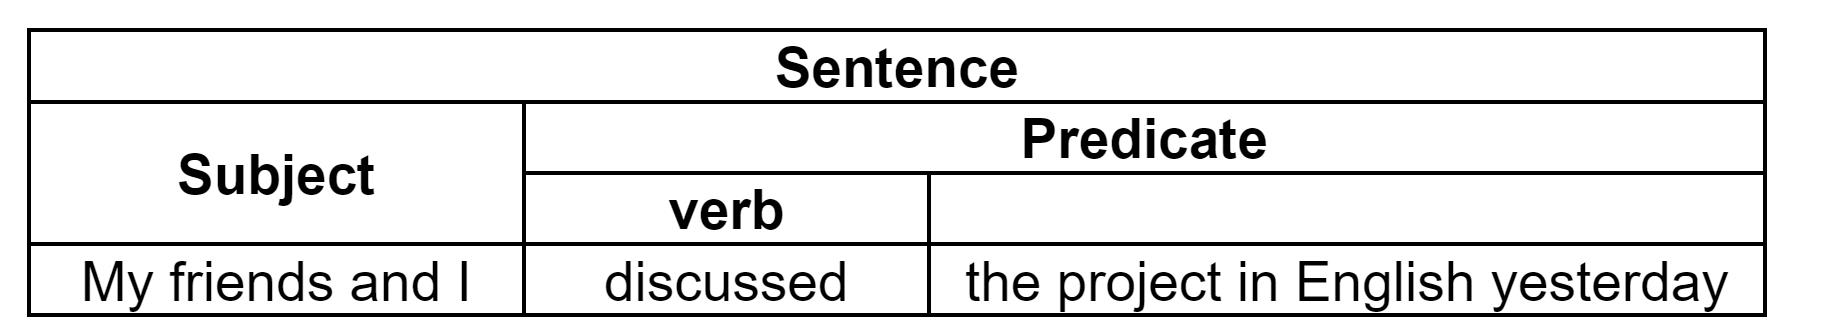 what are sentence structures 62c4ebb4ead93